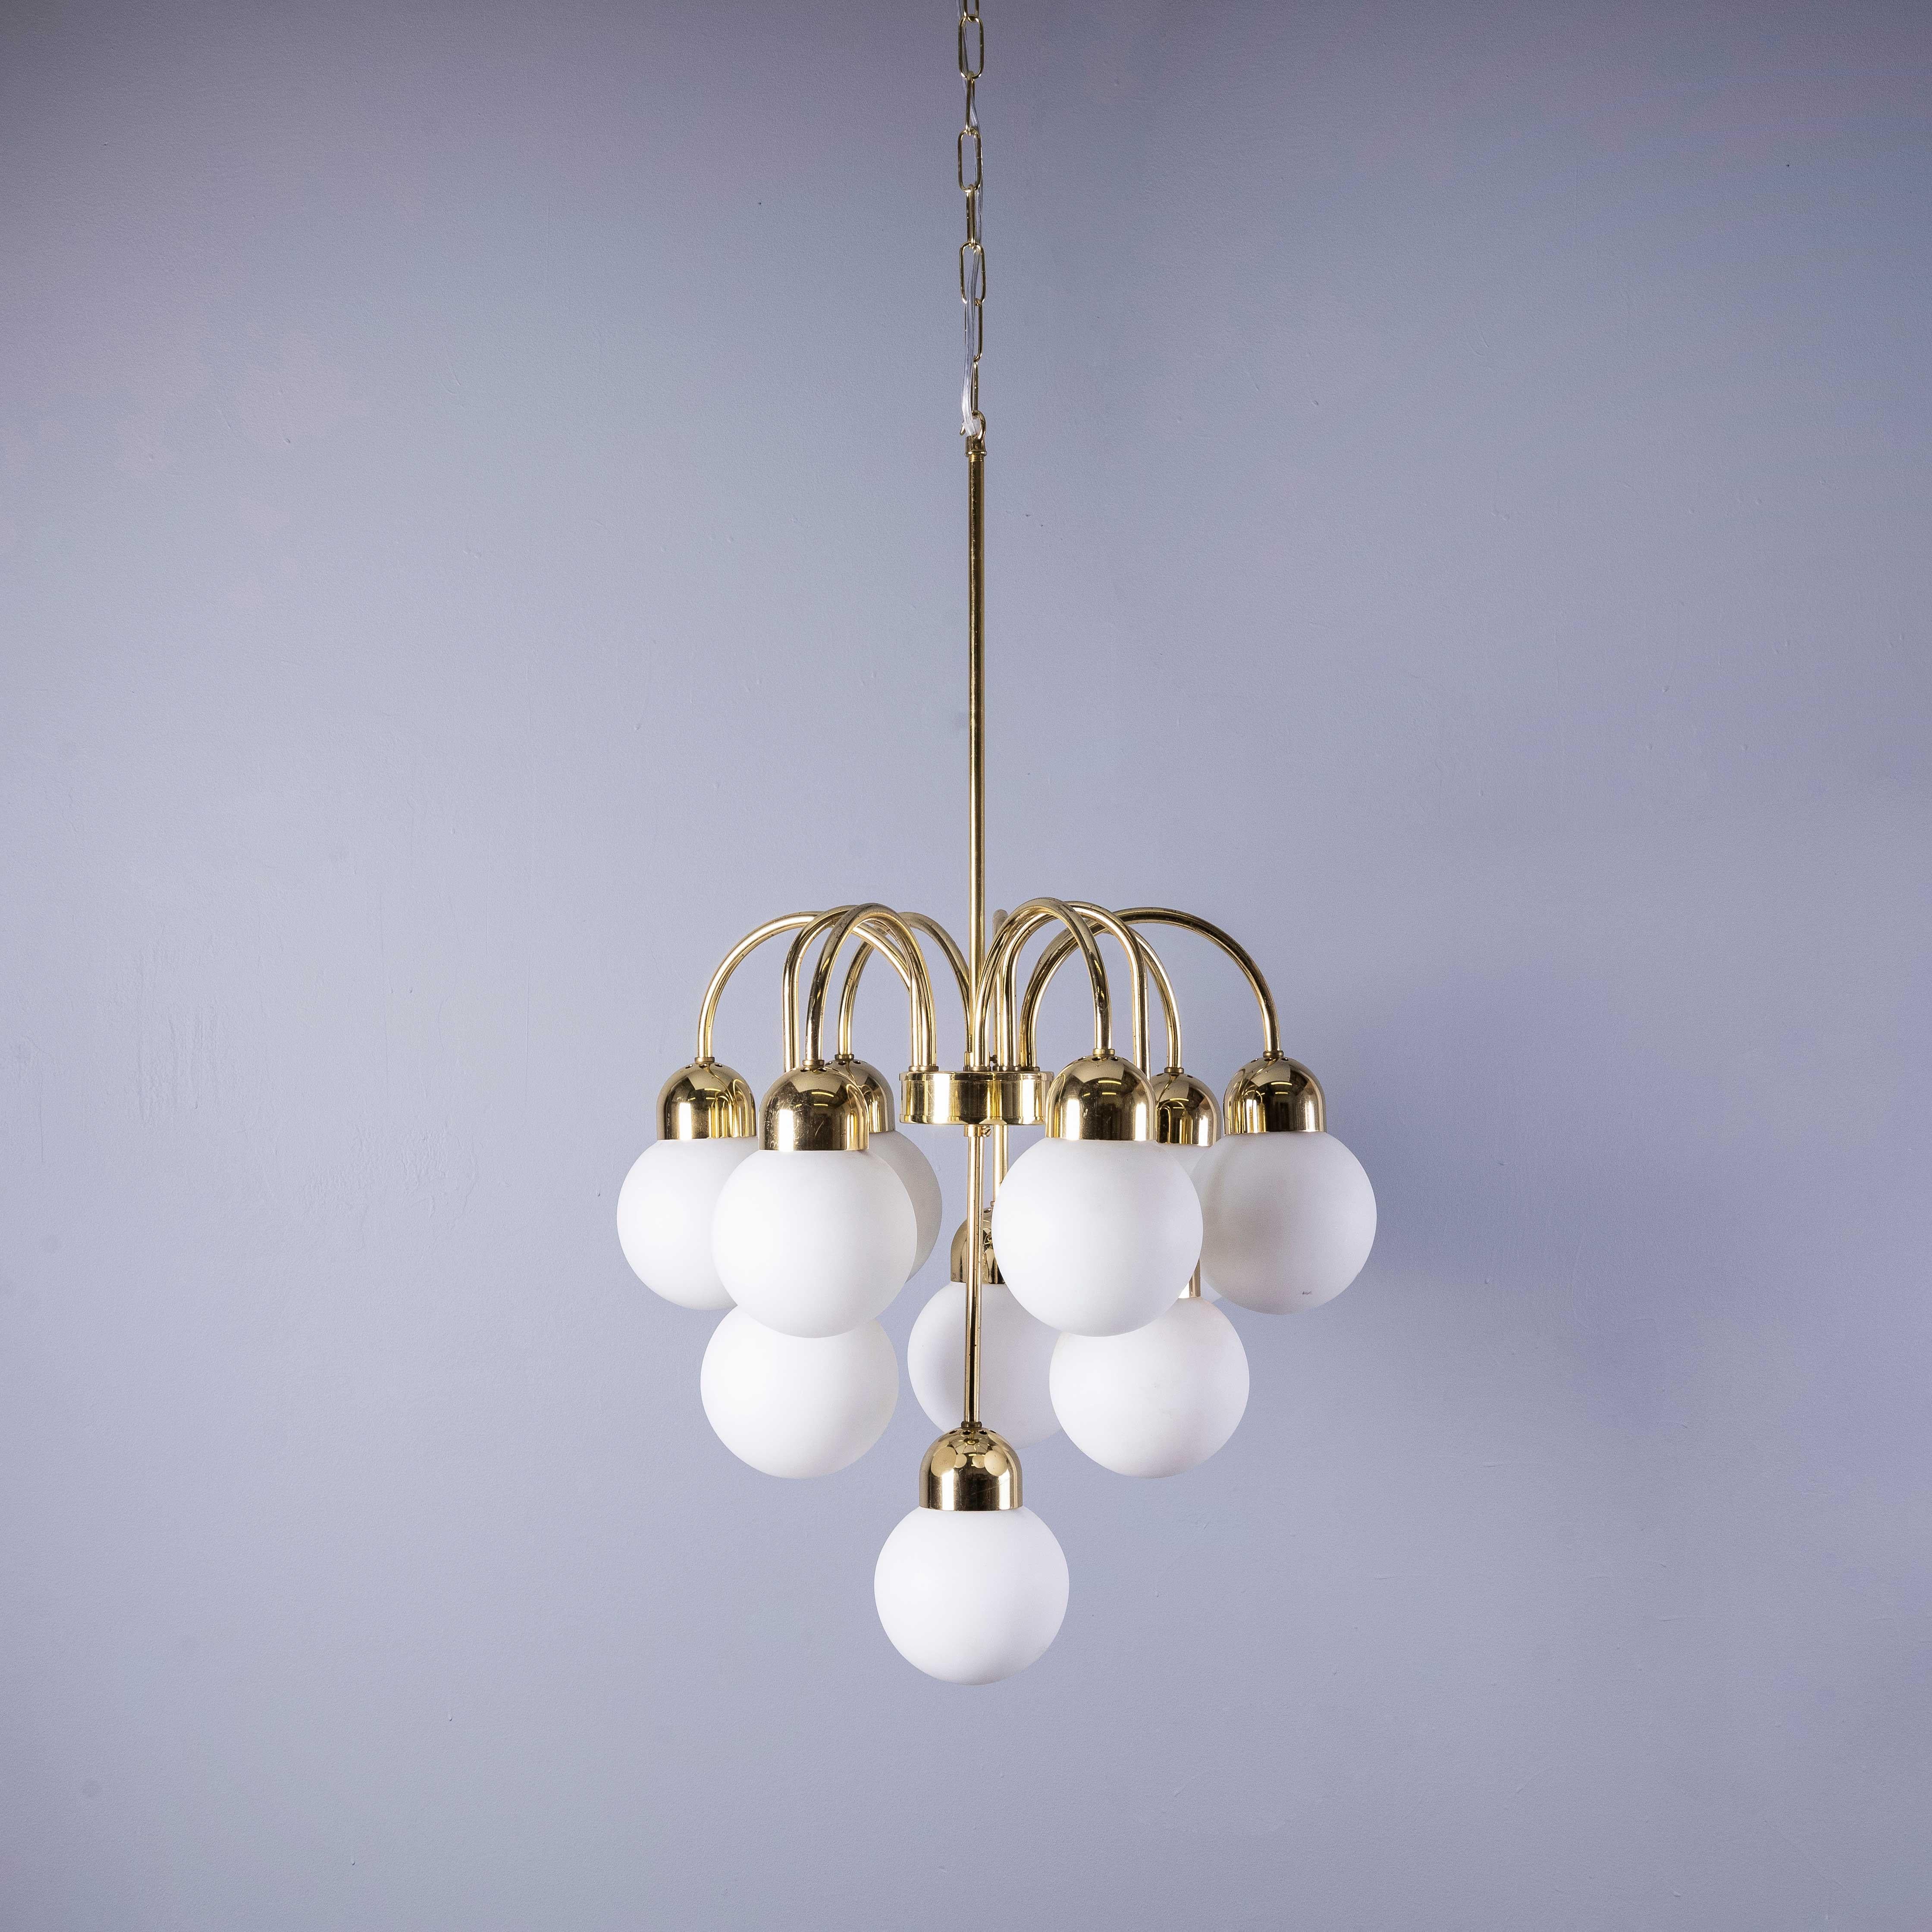 Glass 1950's Original Brass And Opal Globe Pendant Chandelier For Sale